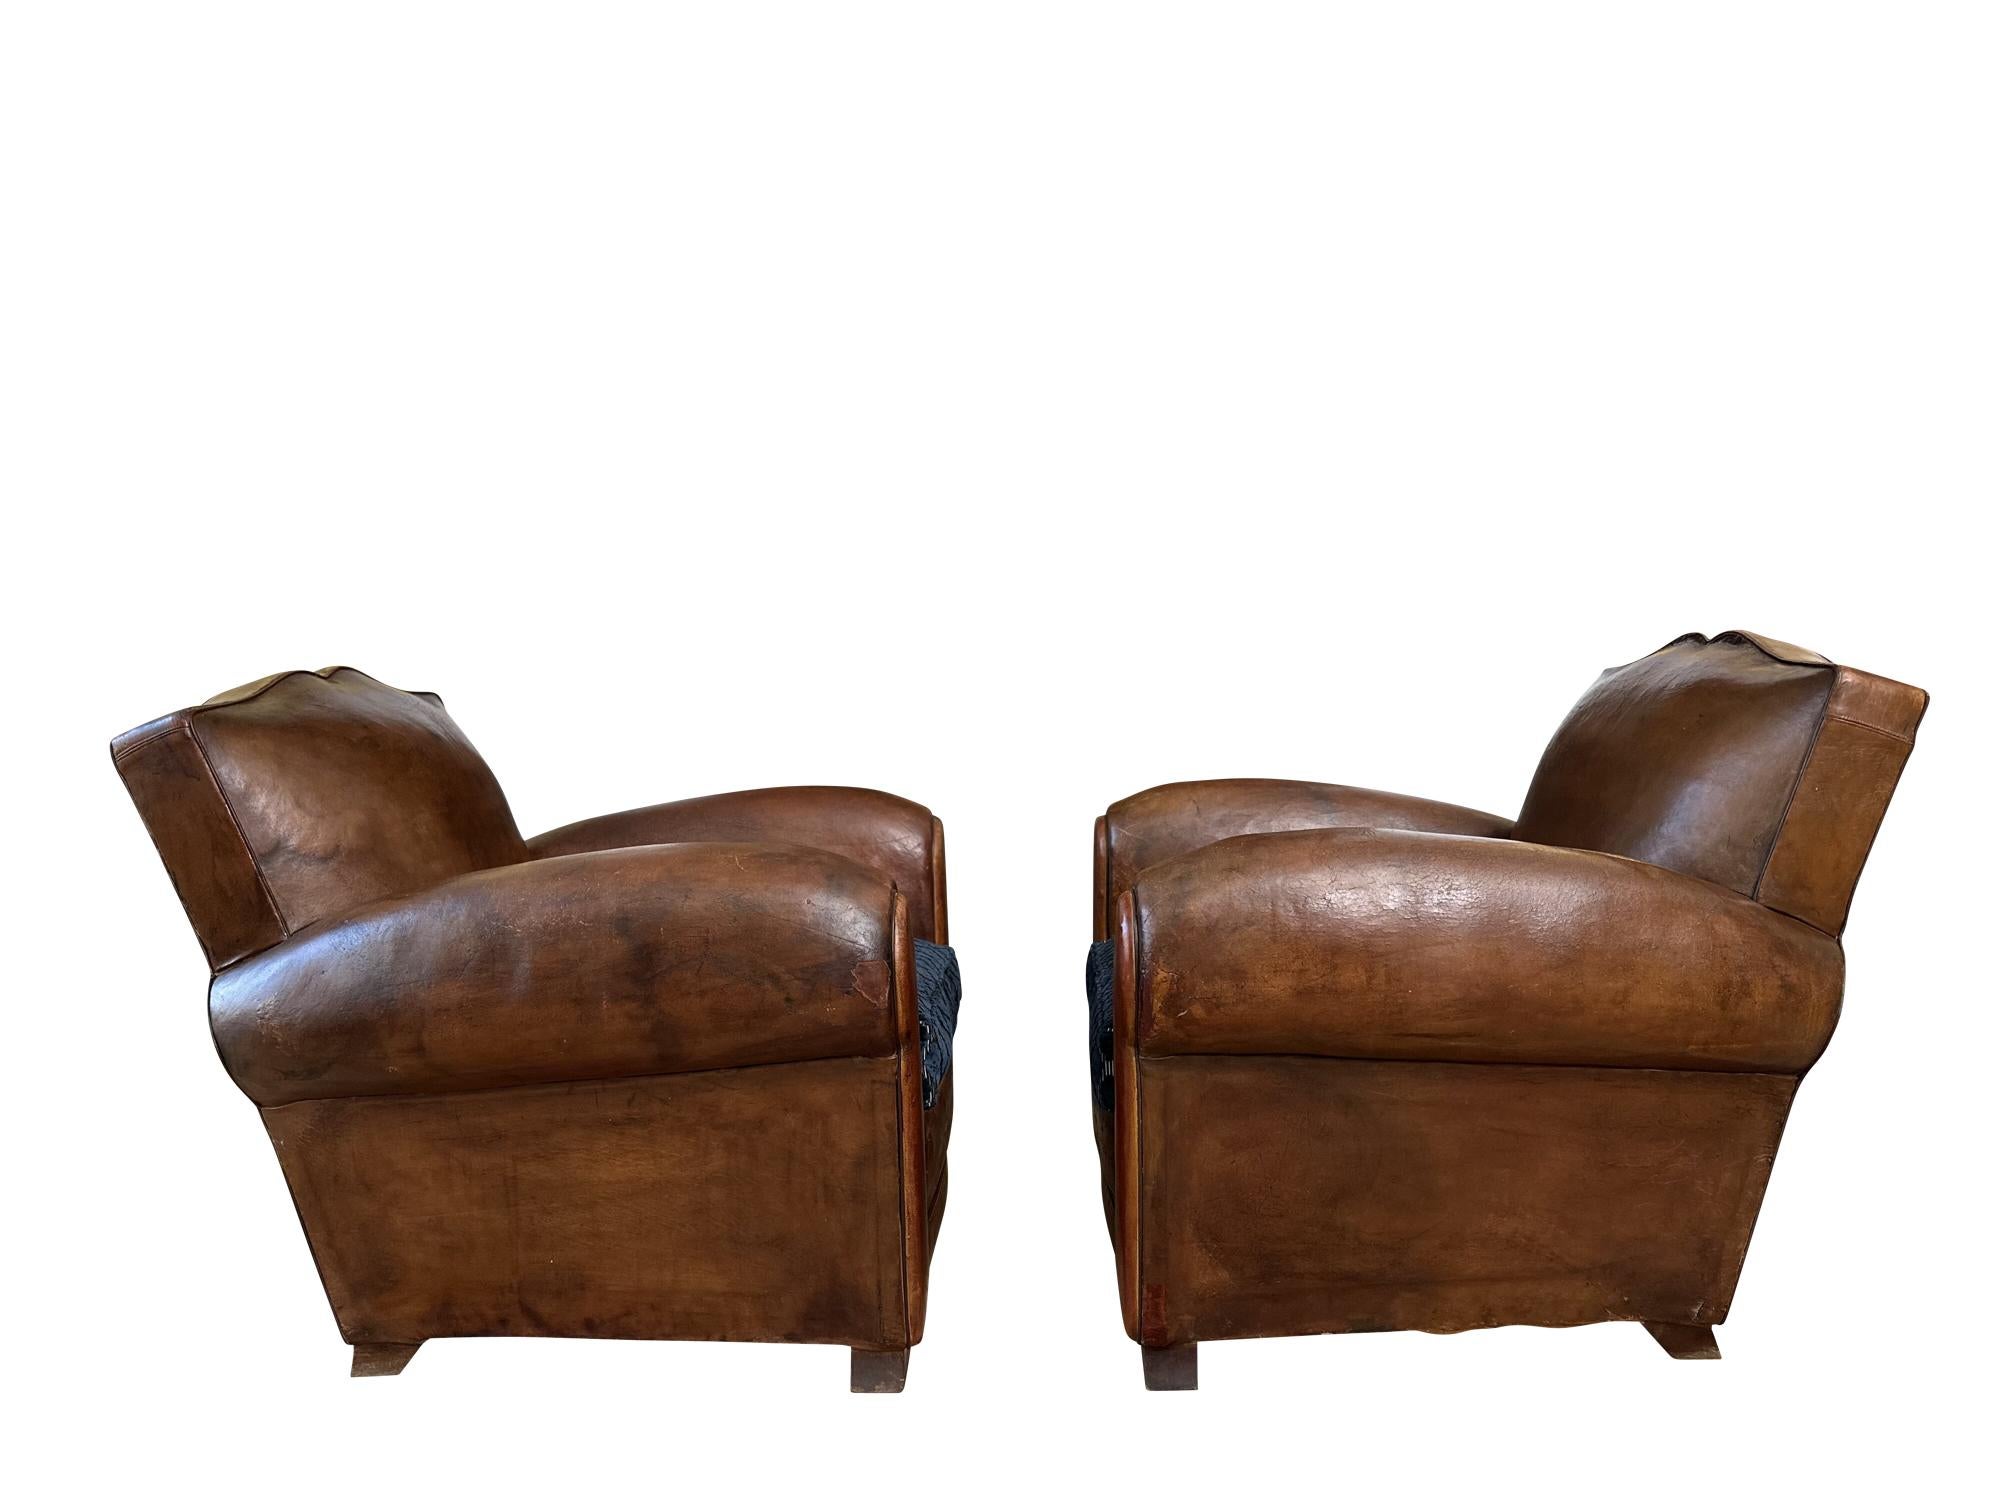 Pair of Mustache original Art Deco French leather club chairs. Circa 1930s with original leather. This is a beautiful, highly coveted Moustache clubs pair with a lot of character and charm. Extremely comfortable. In good general condition with wear